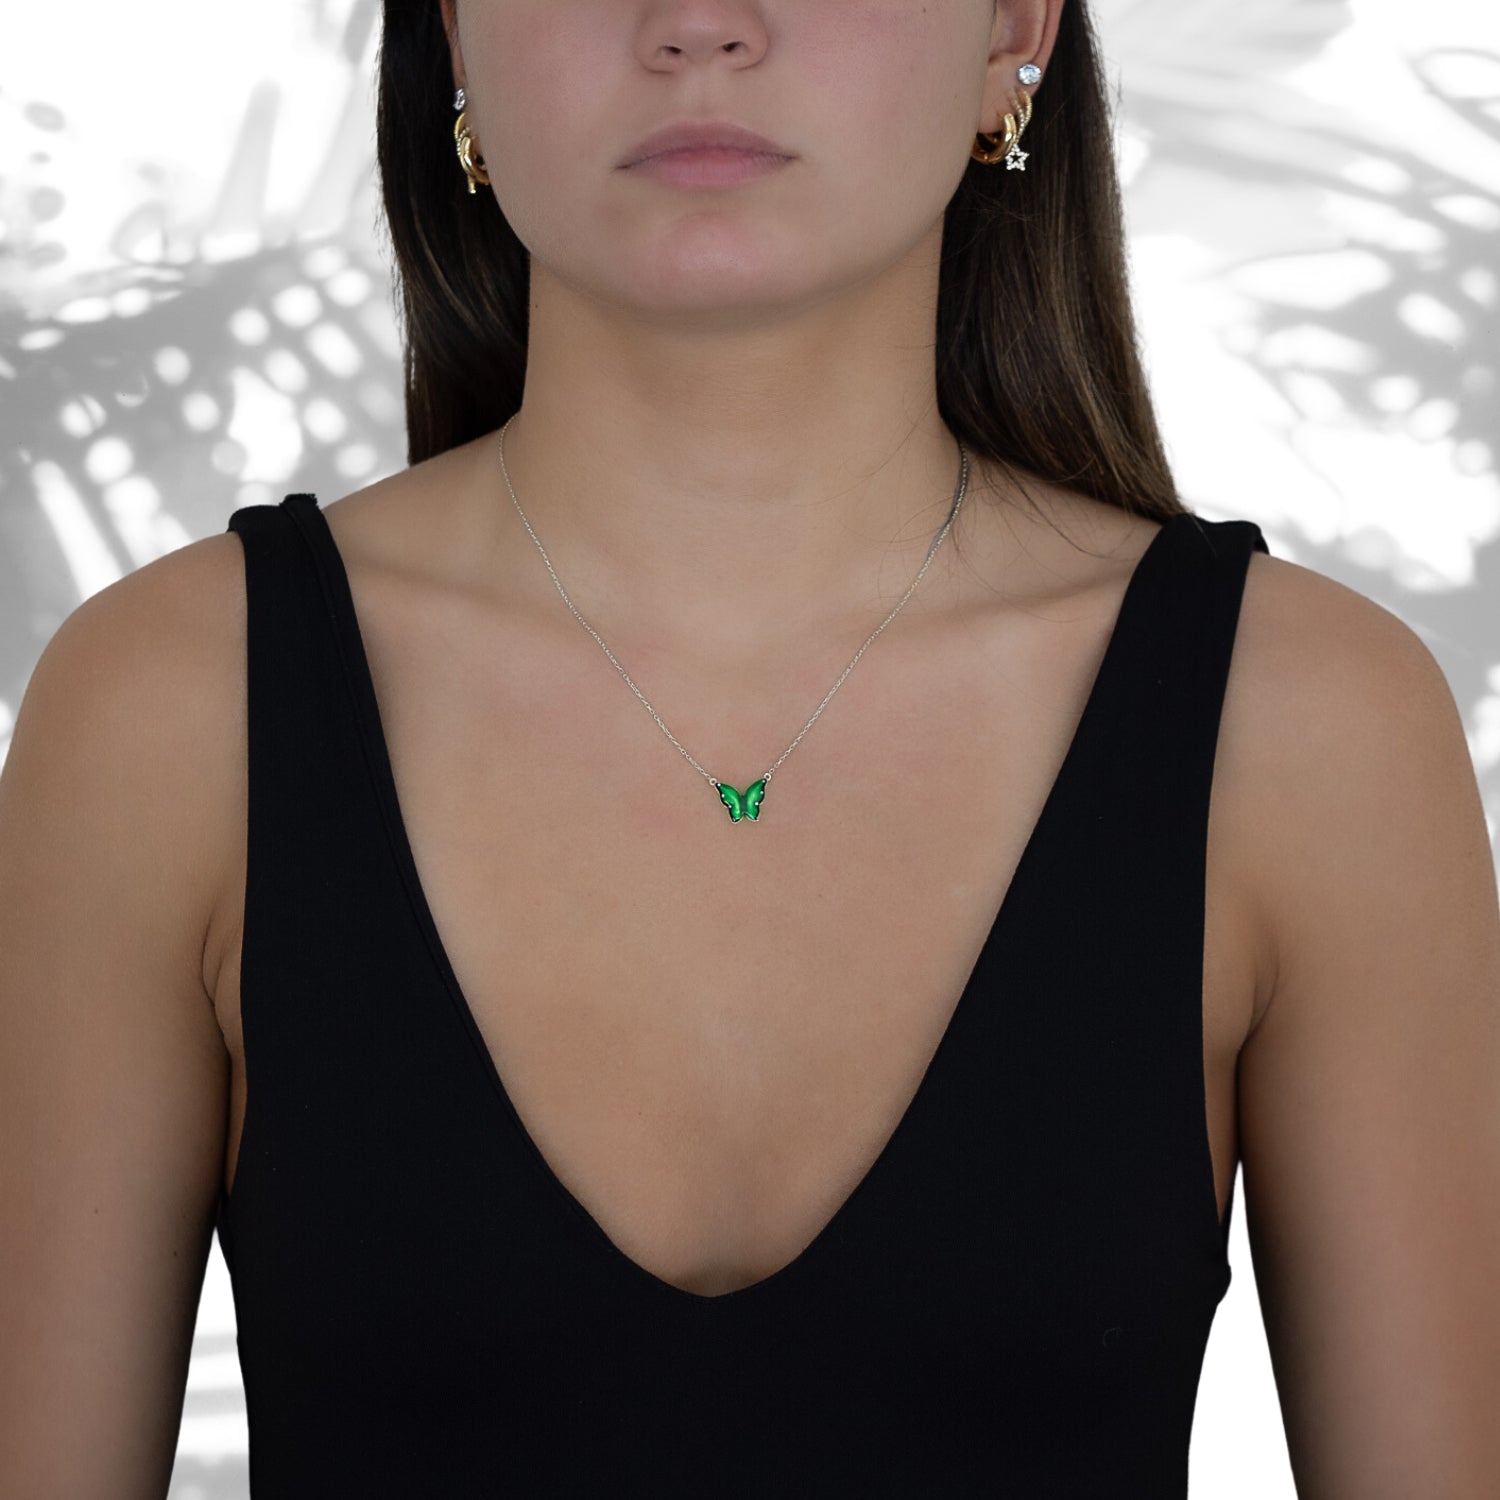 The Silver Abundance Green Enamel Butterfly Necklace complementing the model&#39;s style with elegance and transformation.